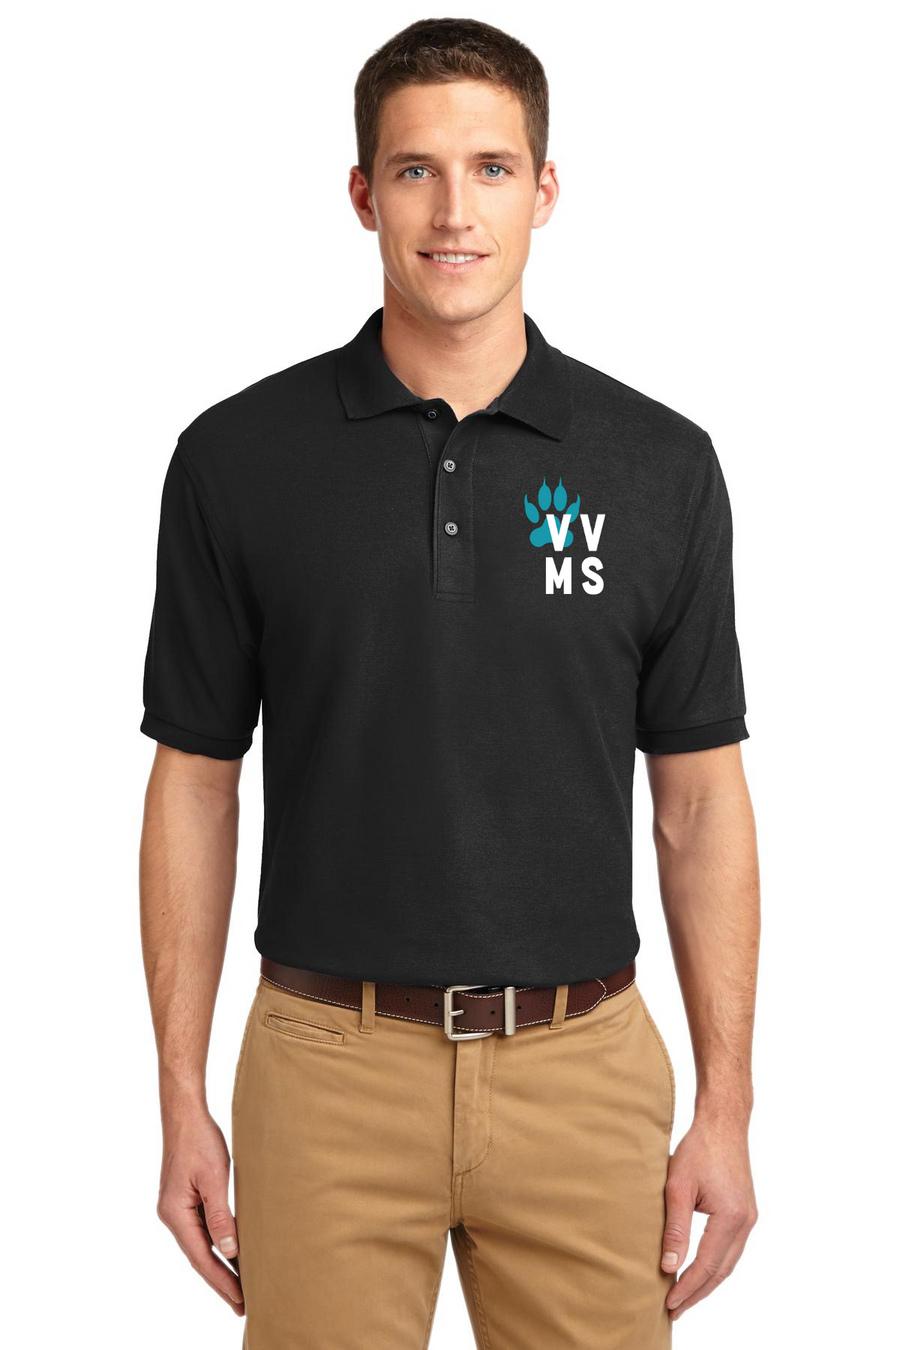 Valley View Middle School On-Demand Spirit Wear-Unisex Polo